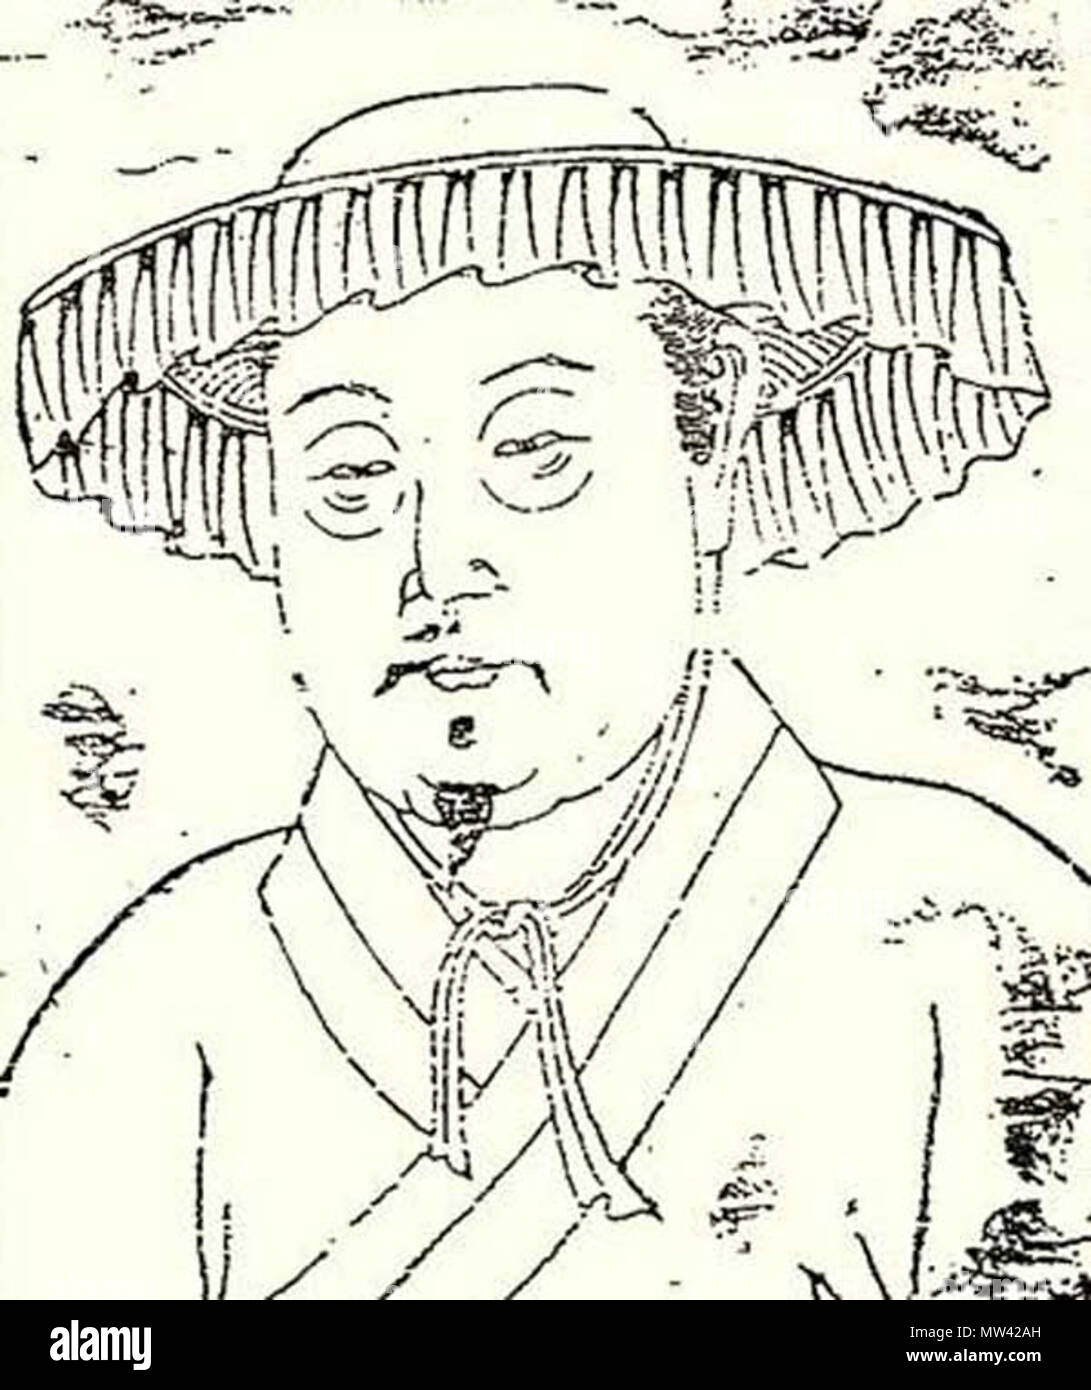 . English: Drawing of Zhang Yanghao (1270 - 1329), Yuan Dynasty poet and official. 16 July 2010, 21:20:29. Unknown 661 Zhang Yanghao Drawing Stock Photo